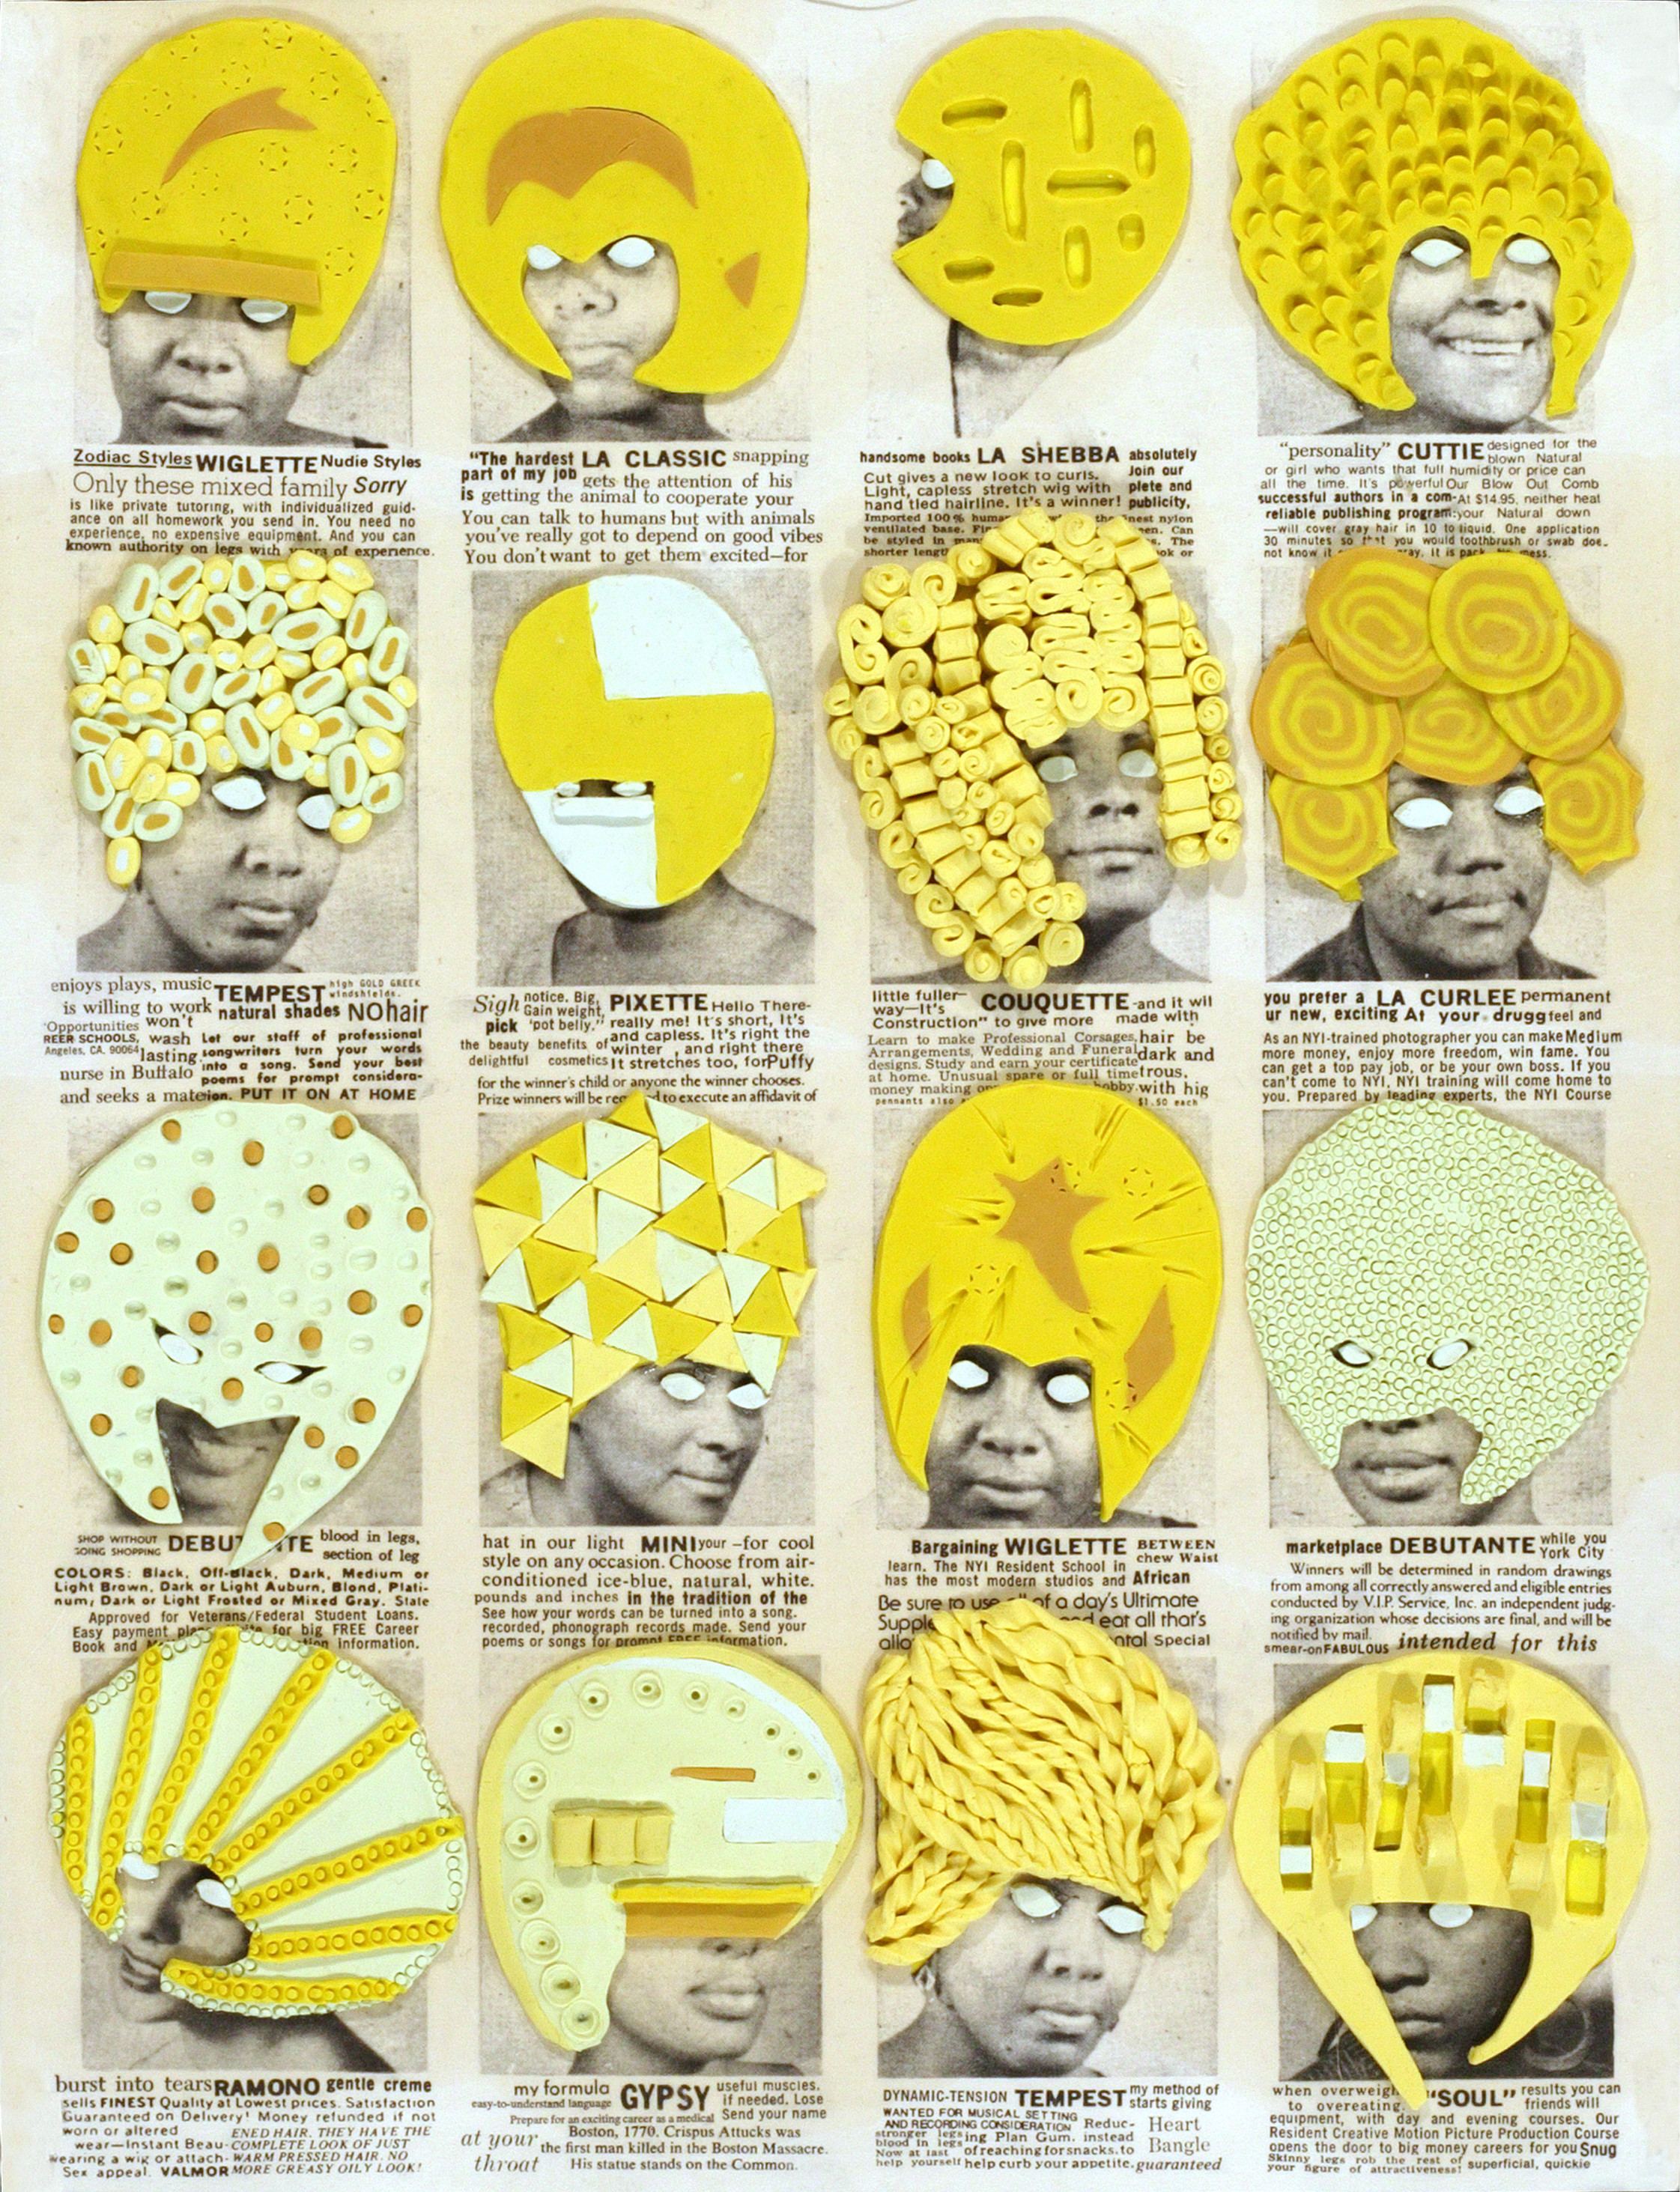 A black-and-white print features a dark-skinned woman's face arranged 16 times in a perfect grid: four across and four down. She faces different directions with different facial expressions. In each, yellow coloring or patterns are overlaid atop her head, creating a hair or helmet-like image. Her eyes have been manipulated and are covered in white. There is small black text below each image, but it is unreadable.